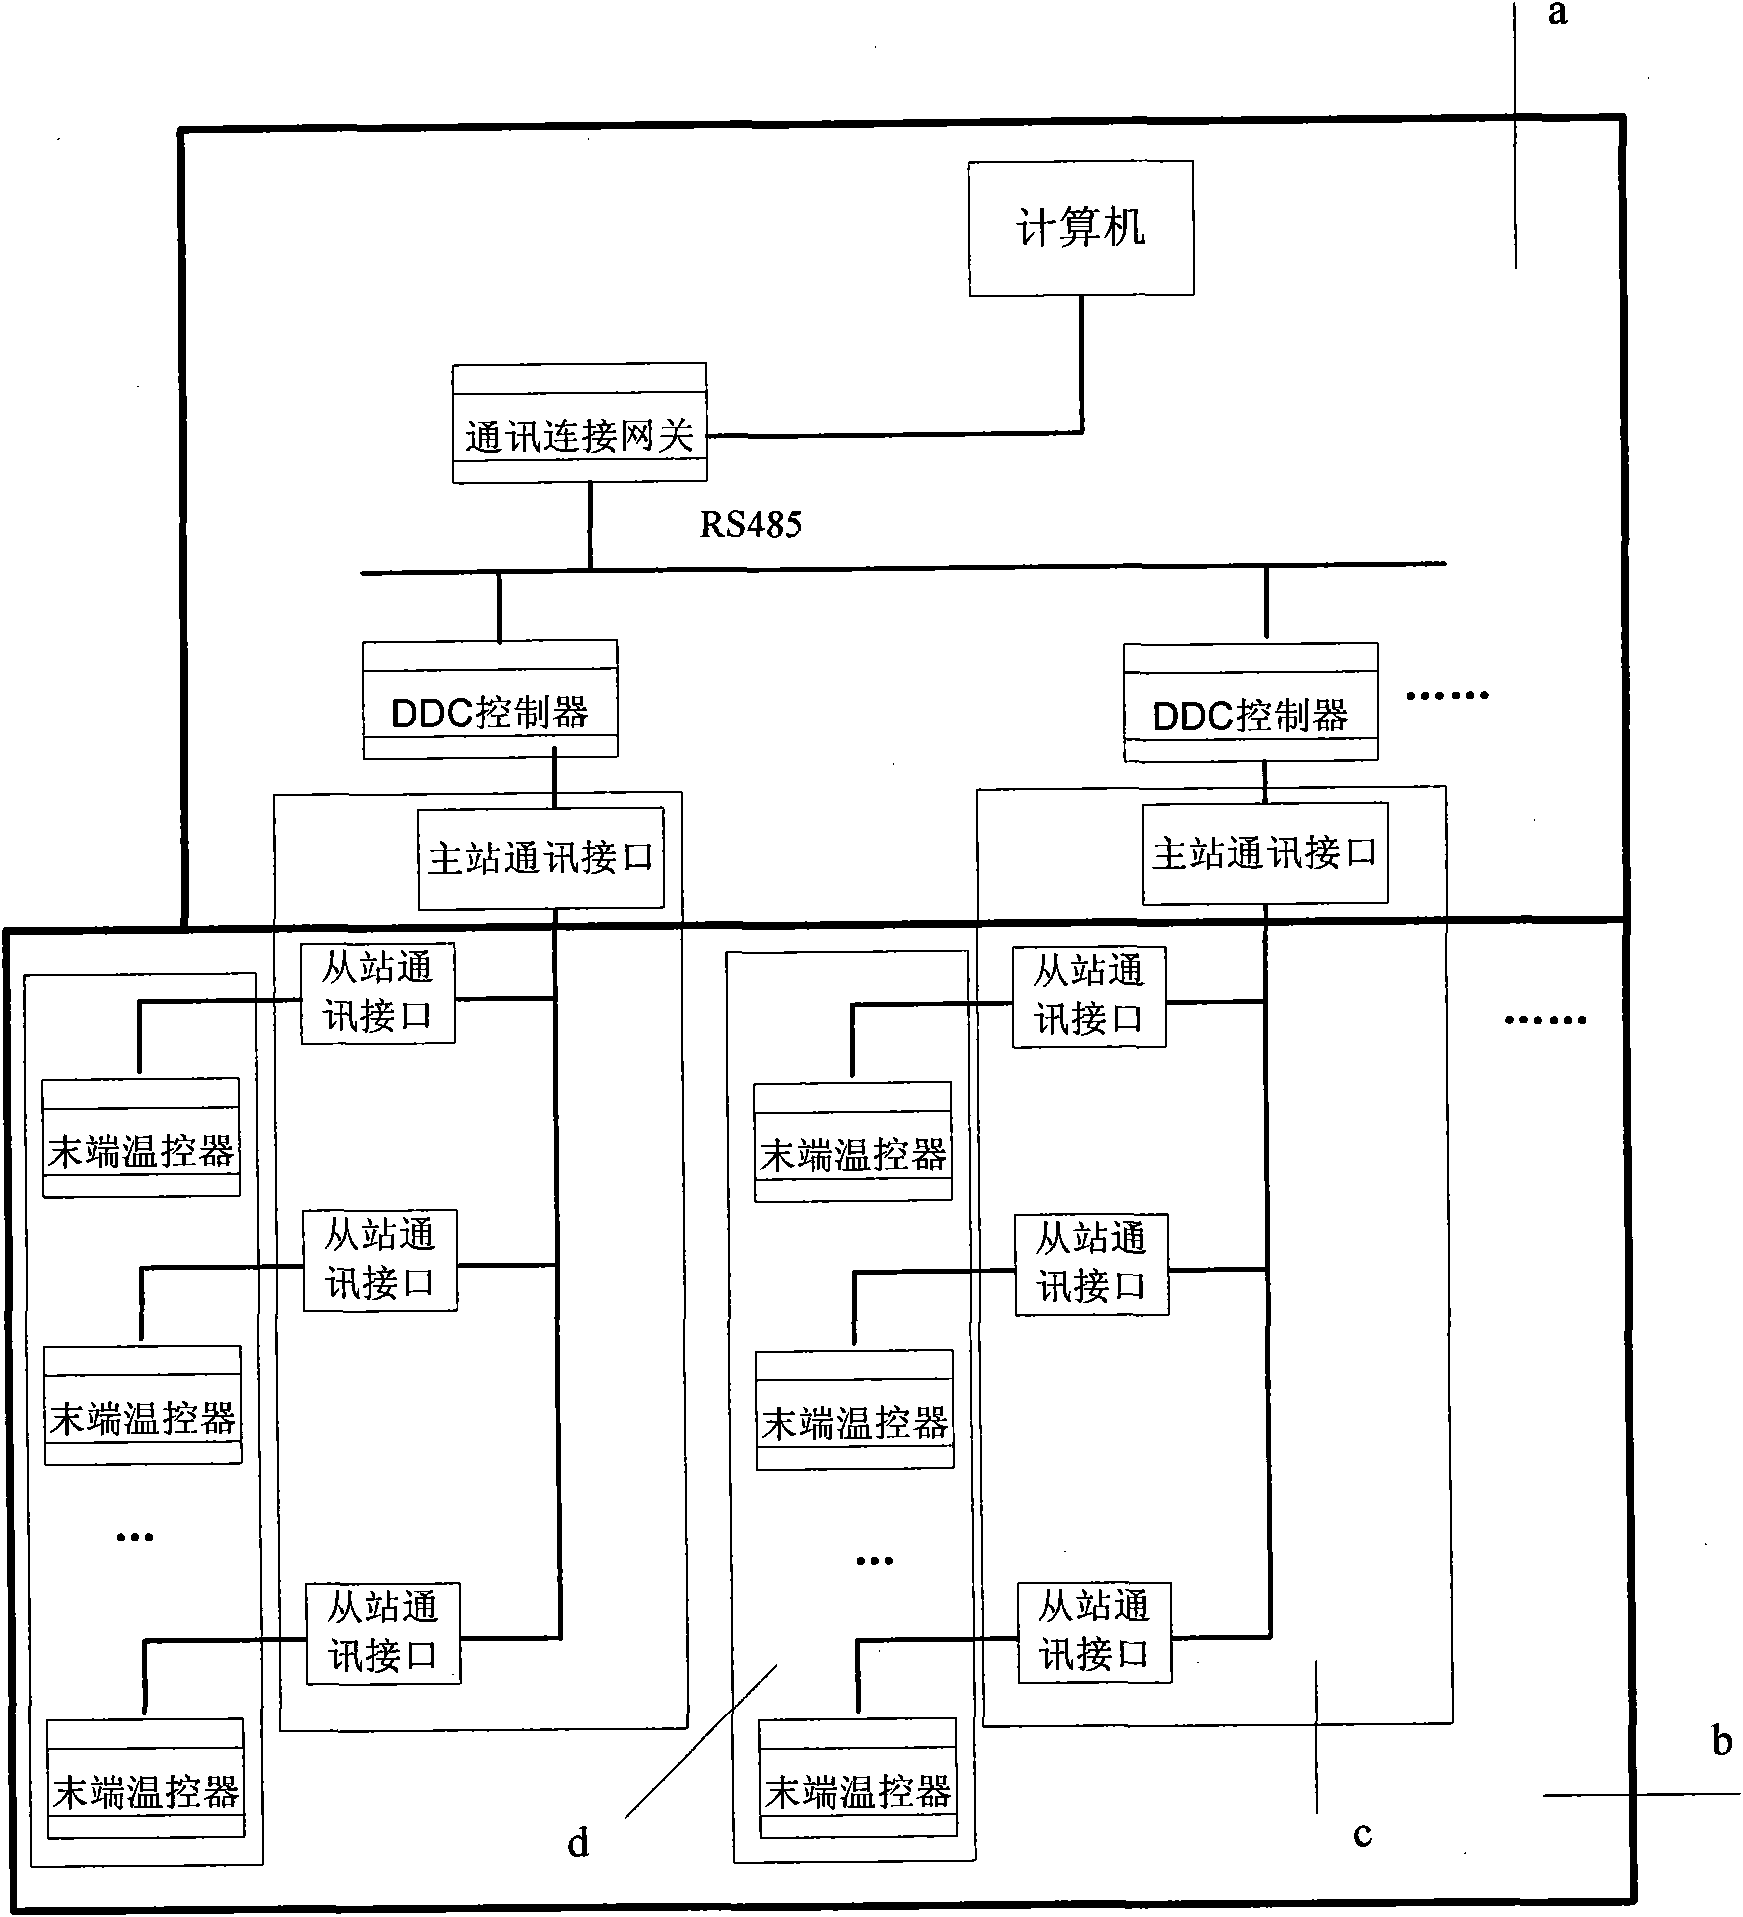 Variable air volume air-conditioner control system with variable frequency fan and digital air valve for adjusting tail end air volume and implementation method